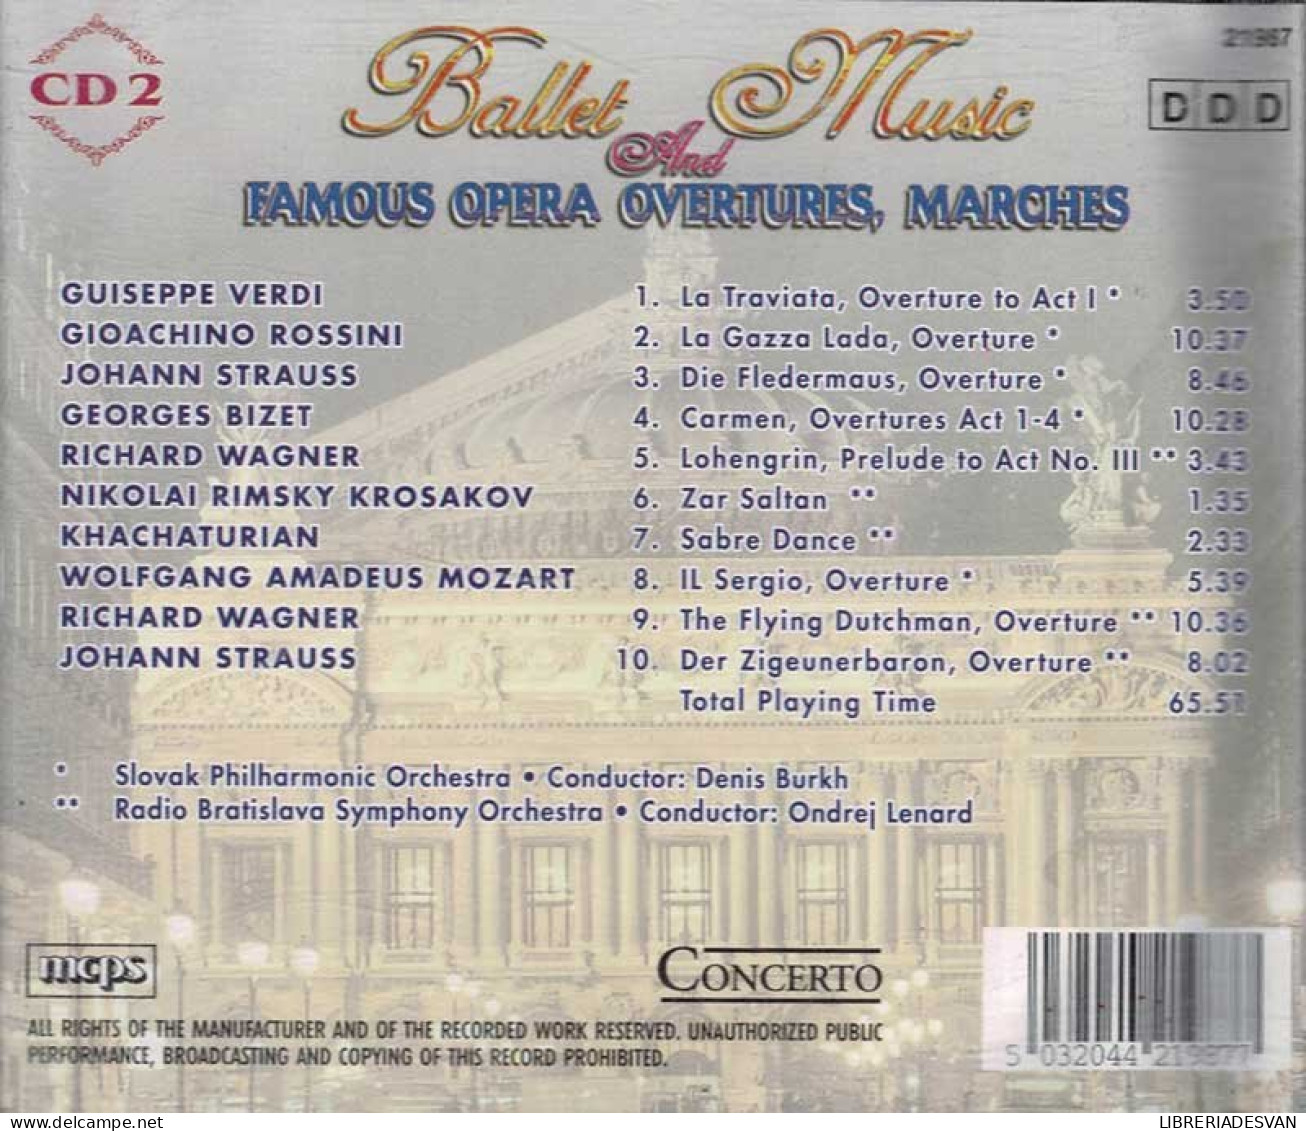 Ballet Music. Famous Opera, Overtures, Marches. CD 2 - Clásica